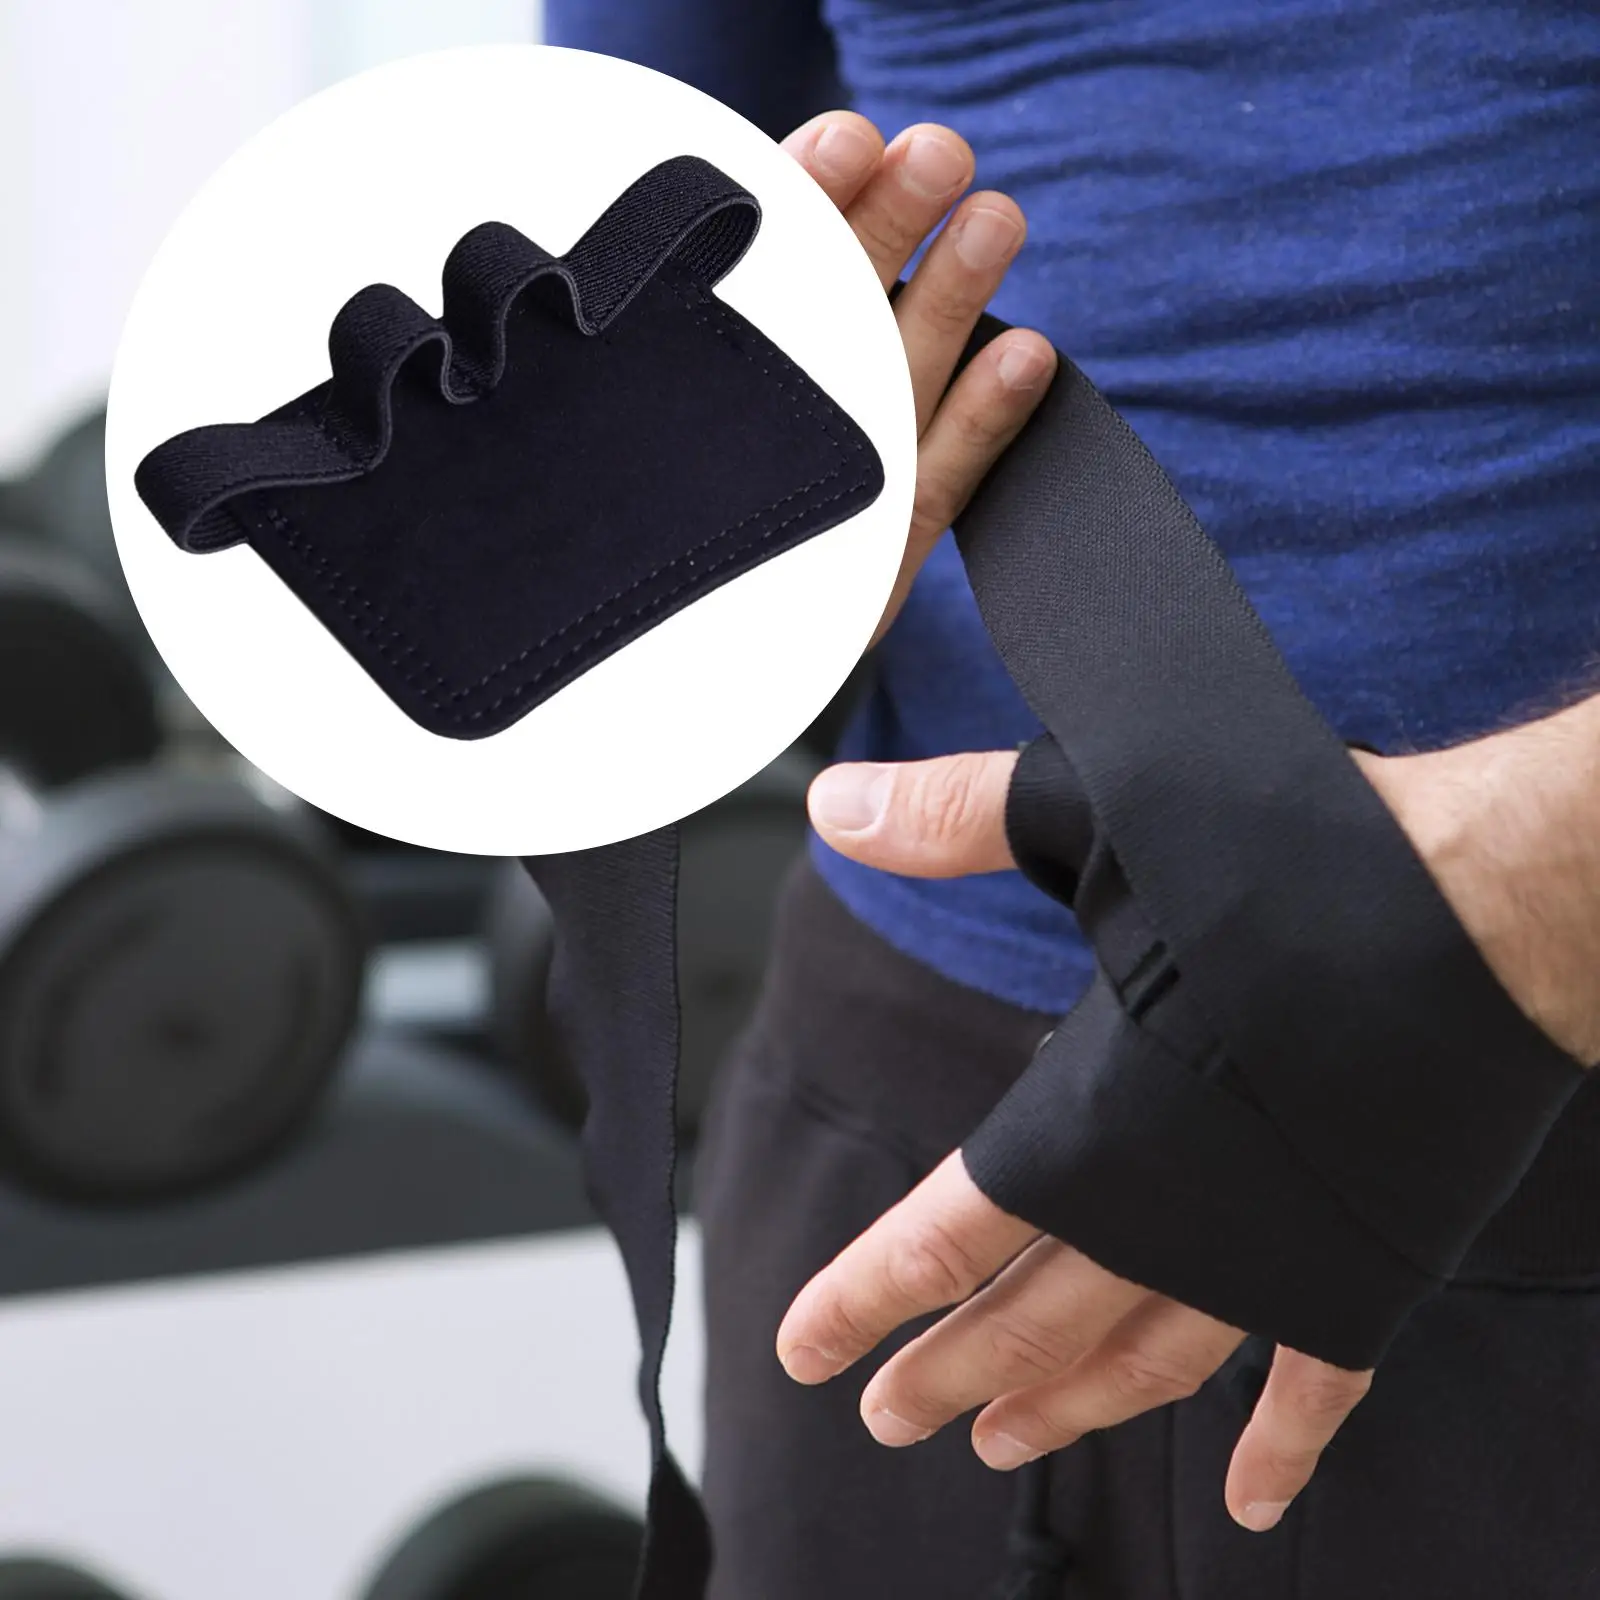  Pad Workout Gloves Lifting Grips for Weight Lifting Training Gym